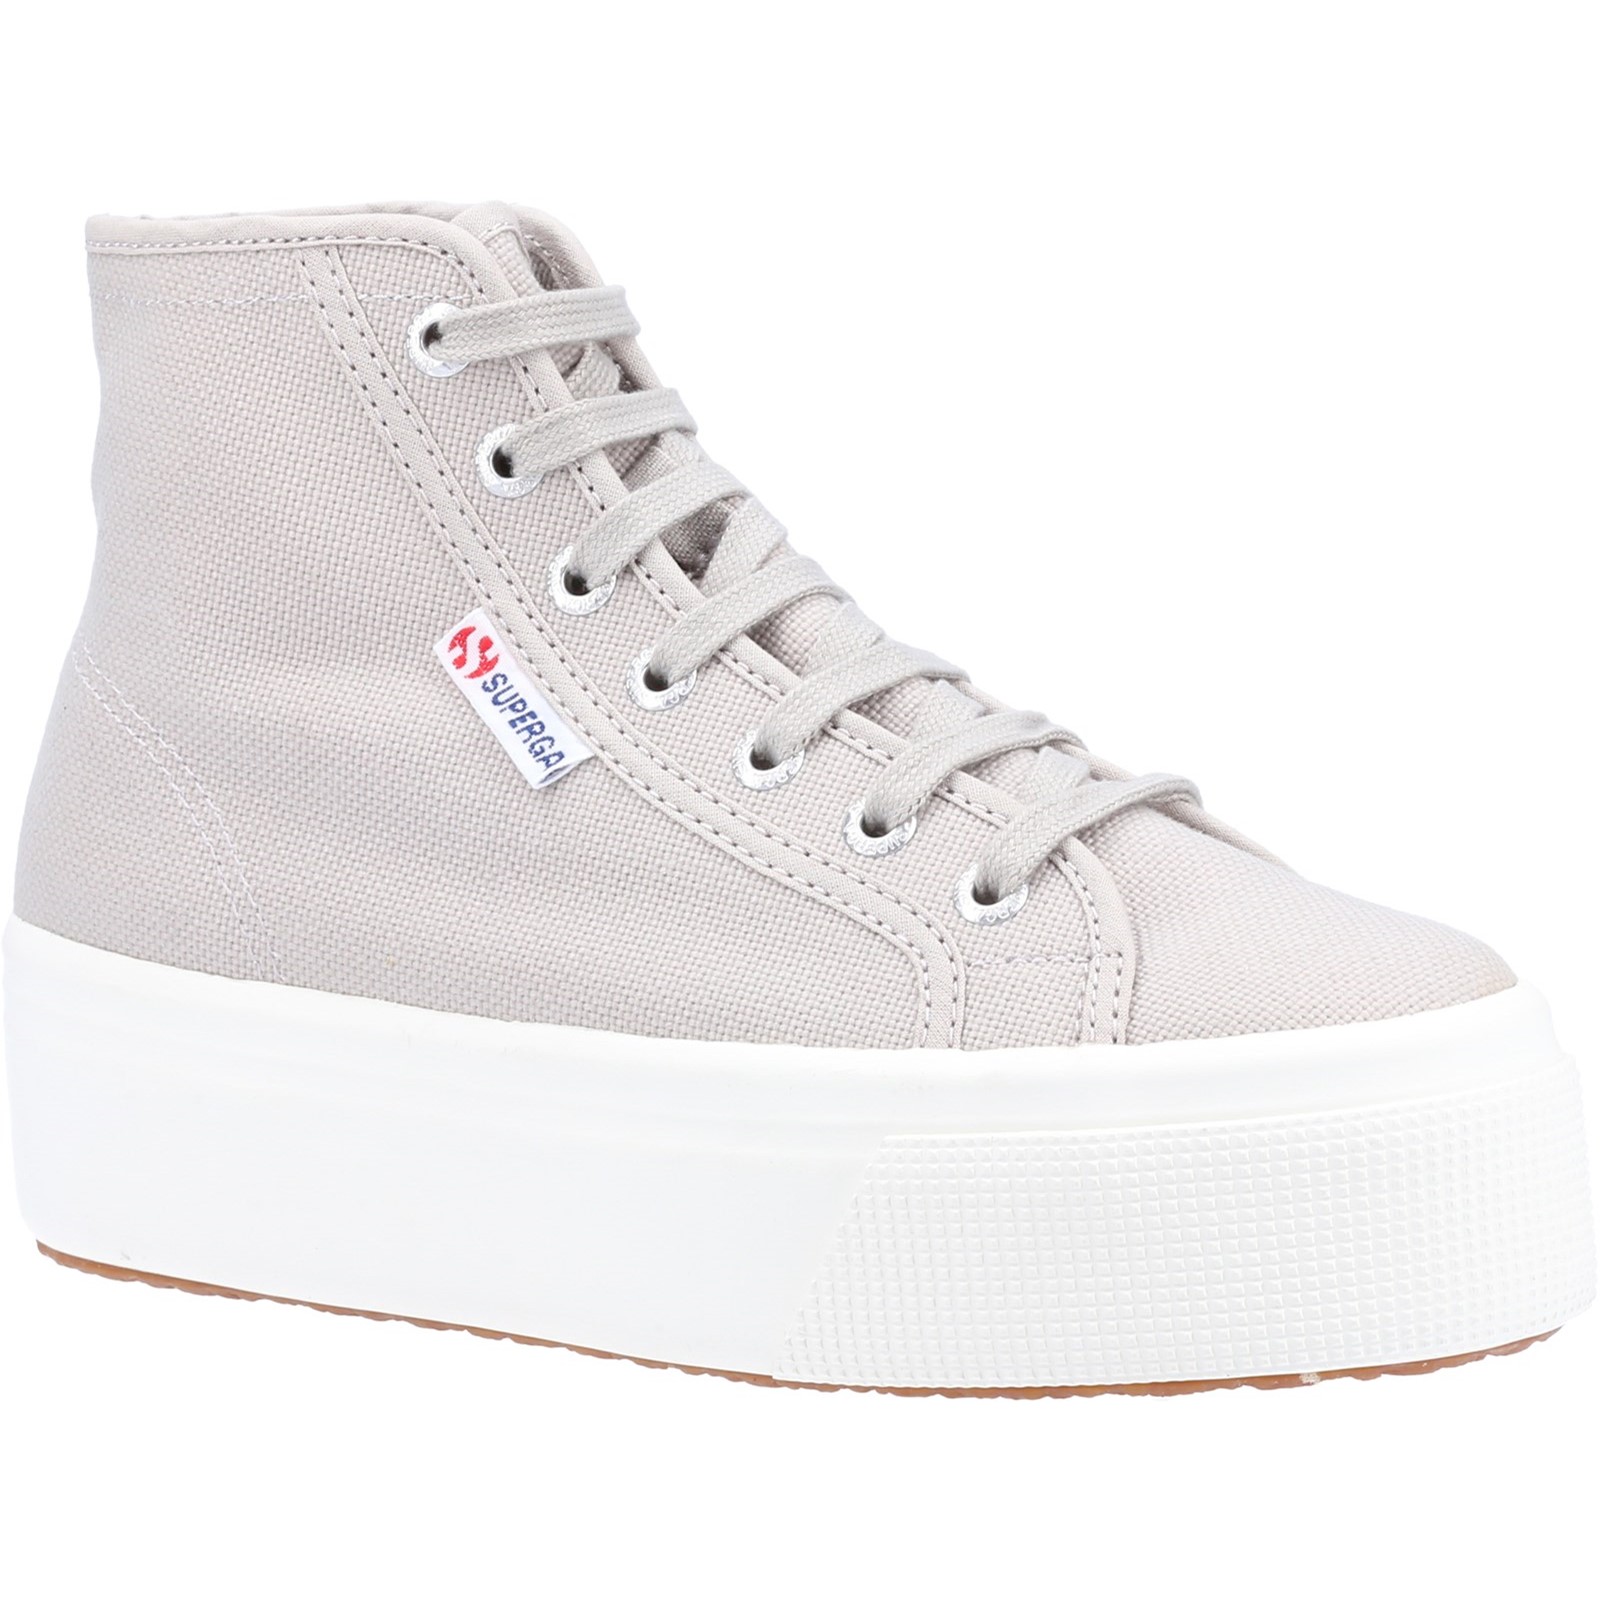 2708 HI TOP Ankle Boots